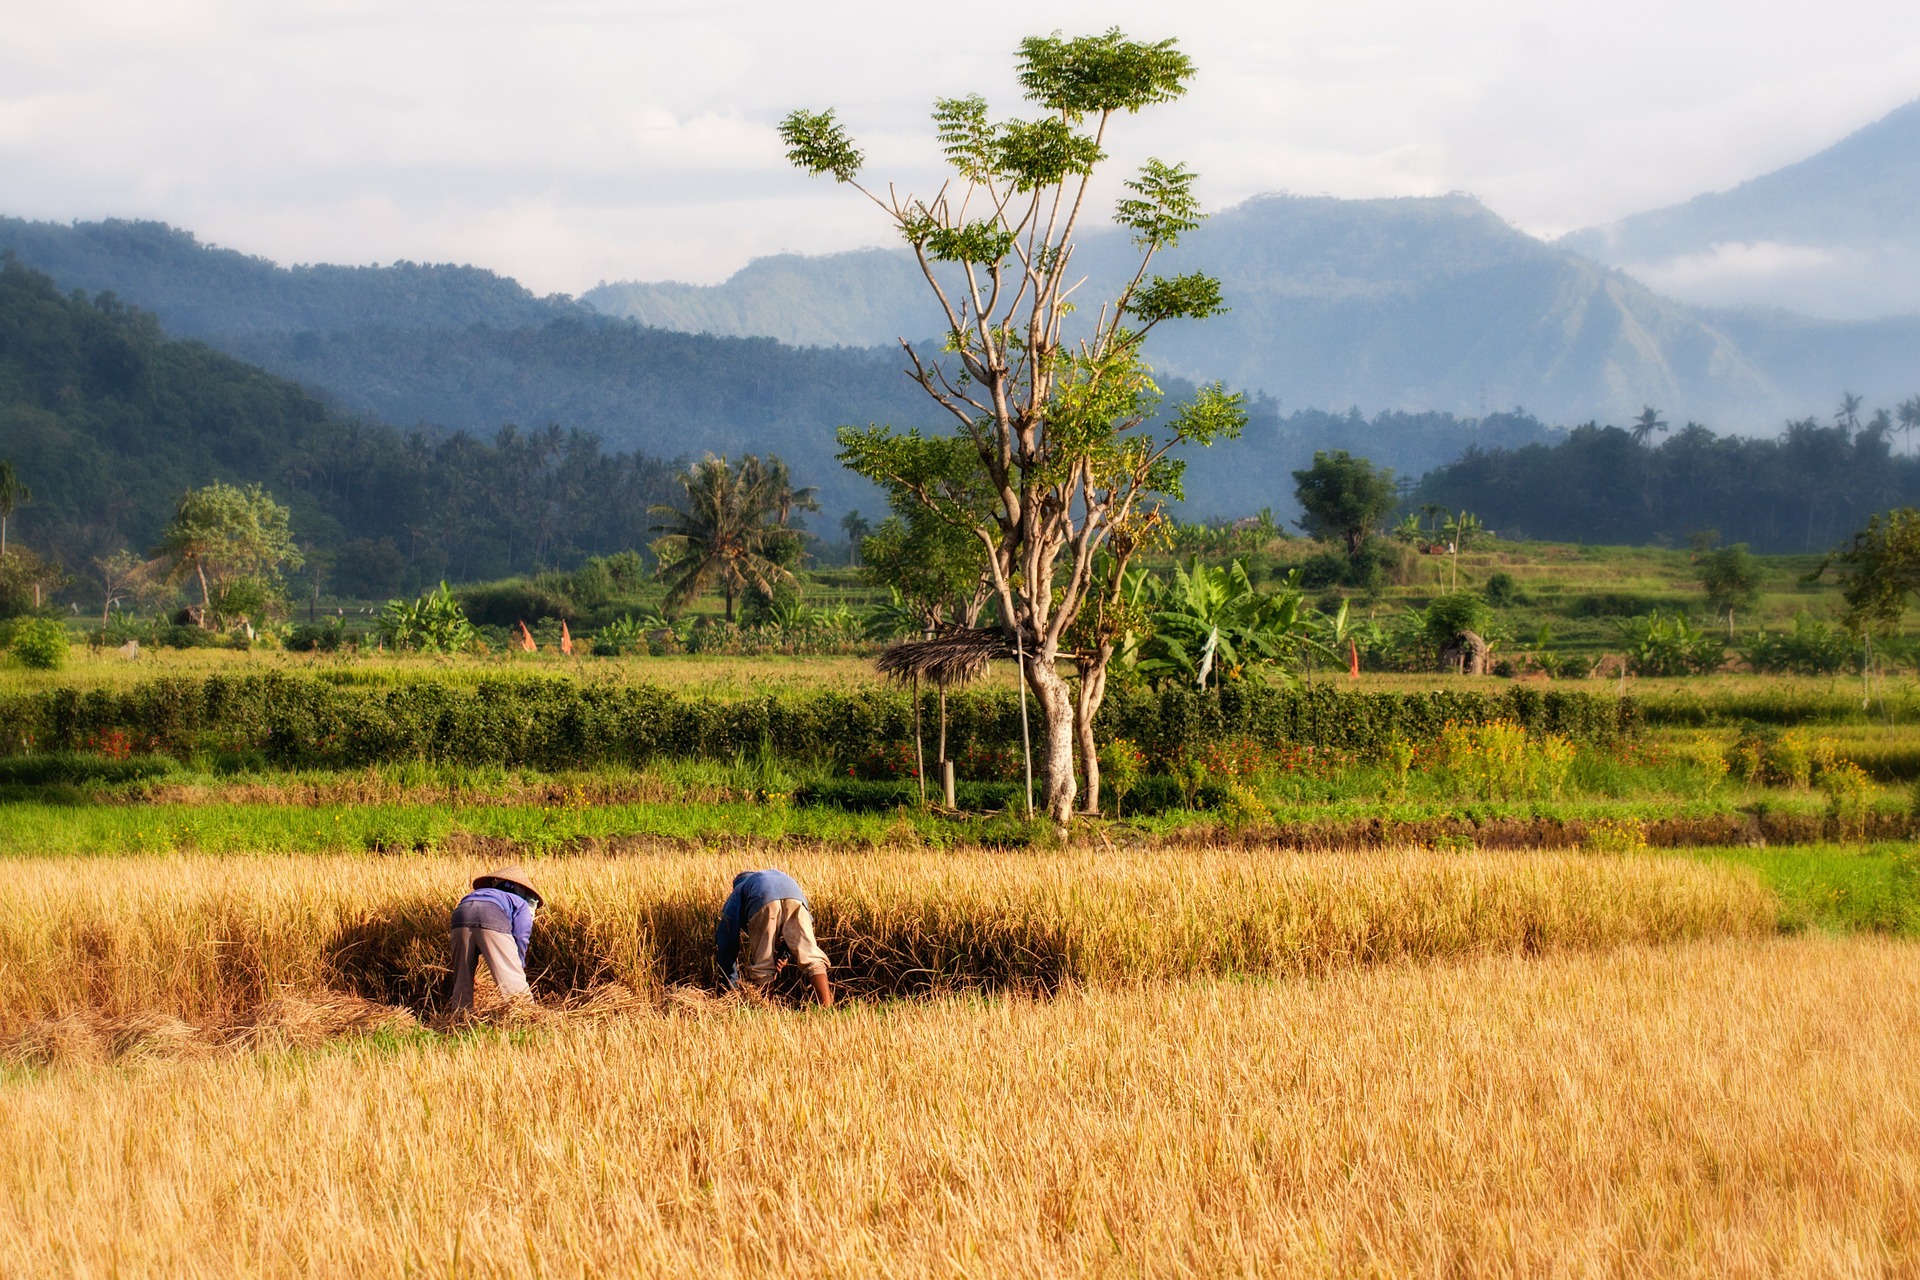 indonesian people working the ricefields